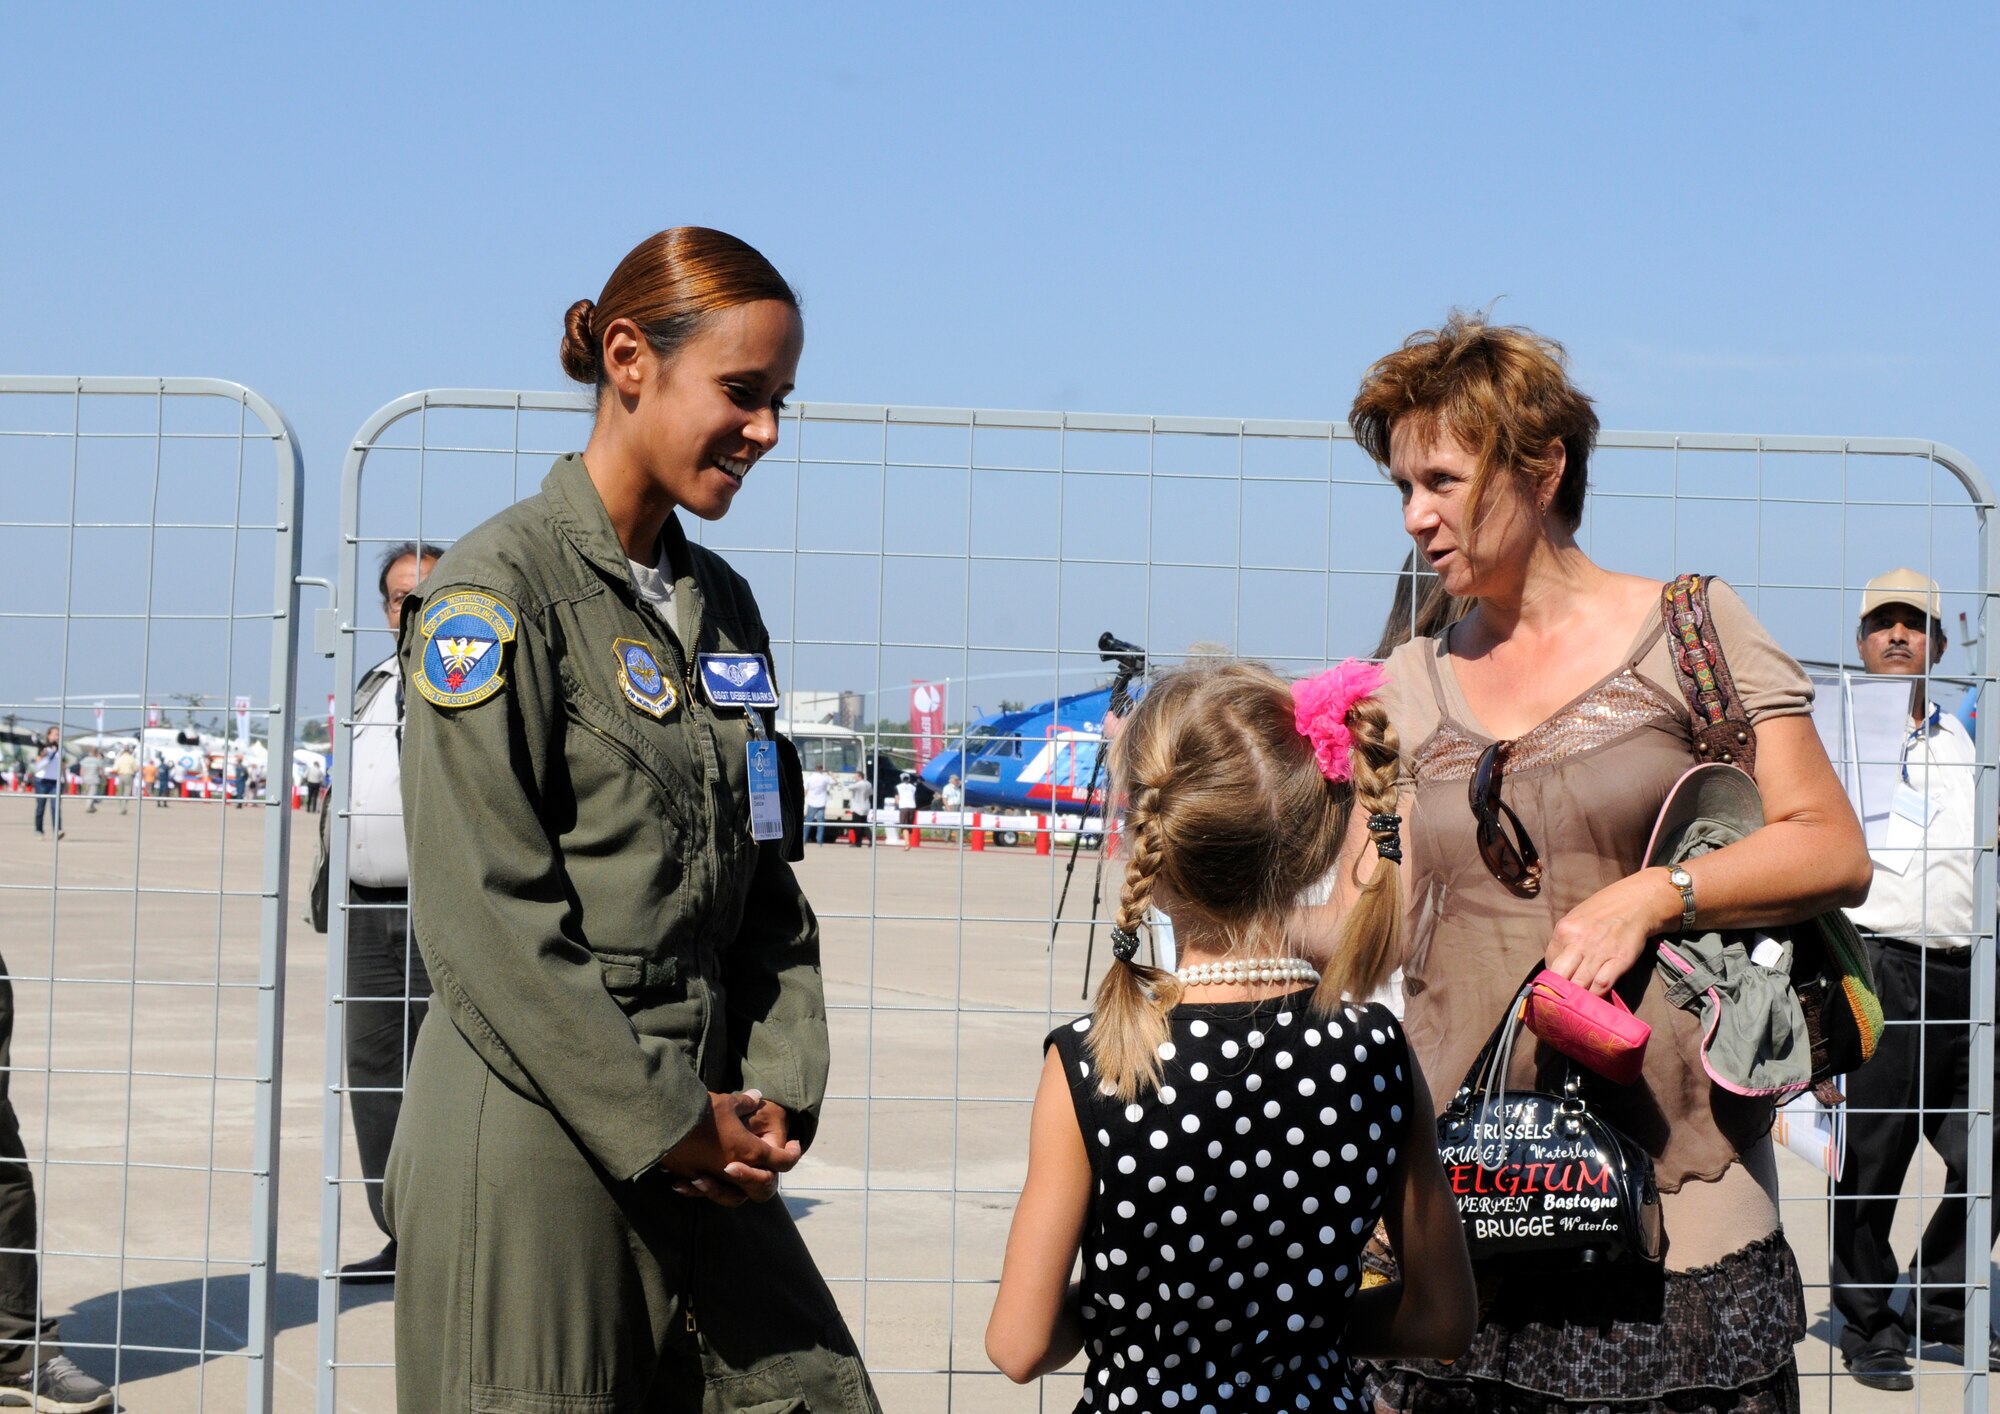 ZHUKOVSKY AIR FIELD, Russia – Staff Sgt. Debbie Marks, 32nd Air Refueling Squadron boom operator, talks to a mother and daughter after her daughter received a tour of the KC-10Extendor here Aug. 16 at the Moscow International Aviation and Space Salon. MAKS is one of the premier events of its type in the world, and Department of Defense participation demonstrates the United States commitment to international security, promotes international cooperation, and contributes to U.S. foreign policy objectives. The U.S. Air Force has a KC-10 Extender, two F-16C Fighting Falcons, two A-10 Thunderbolt II, one F-15E Strike Eagle, one B-52 Stratotanker, C-130J Super Hercules and C-5M Galaxy statics for the show.  (U.S. Air Force photo/Master Sgt. Kelley J. Stewart)